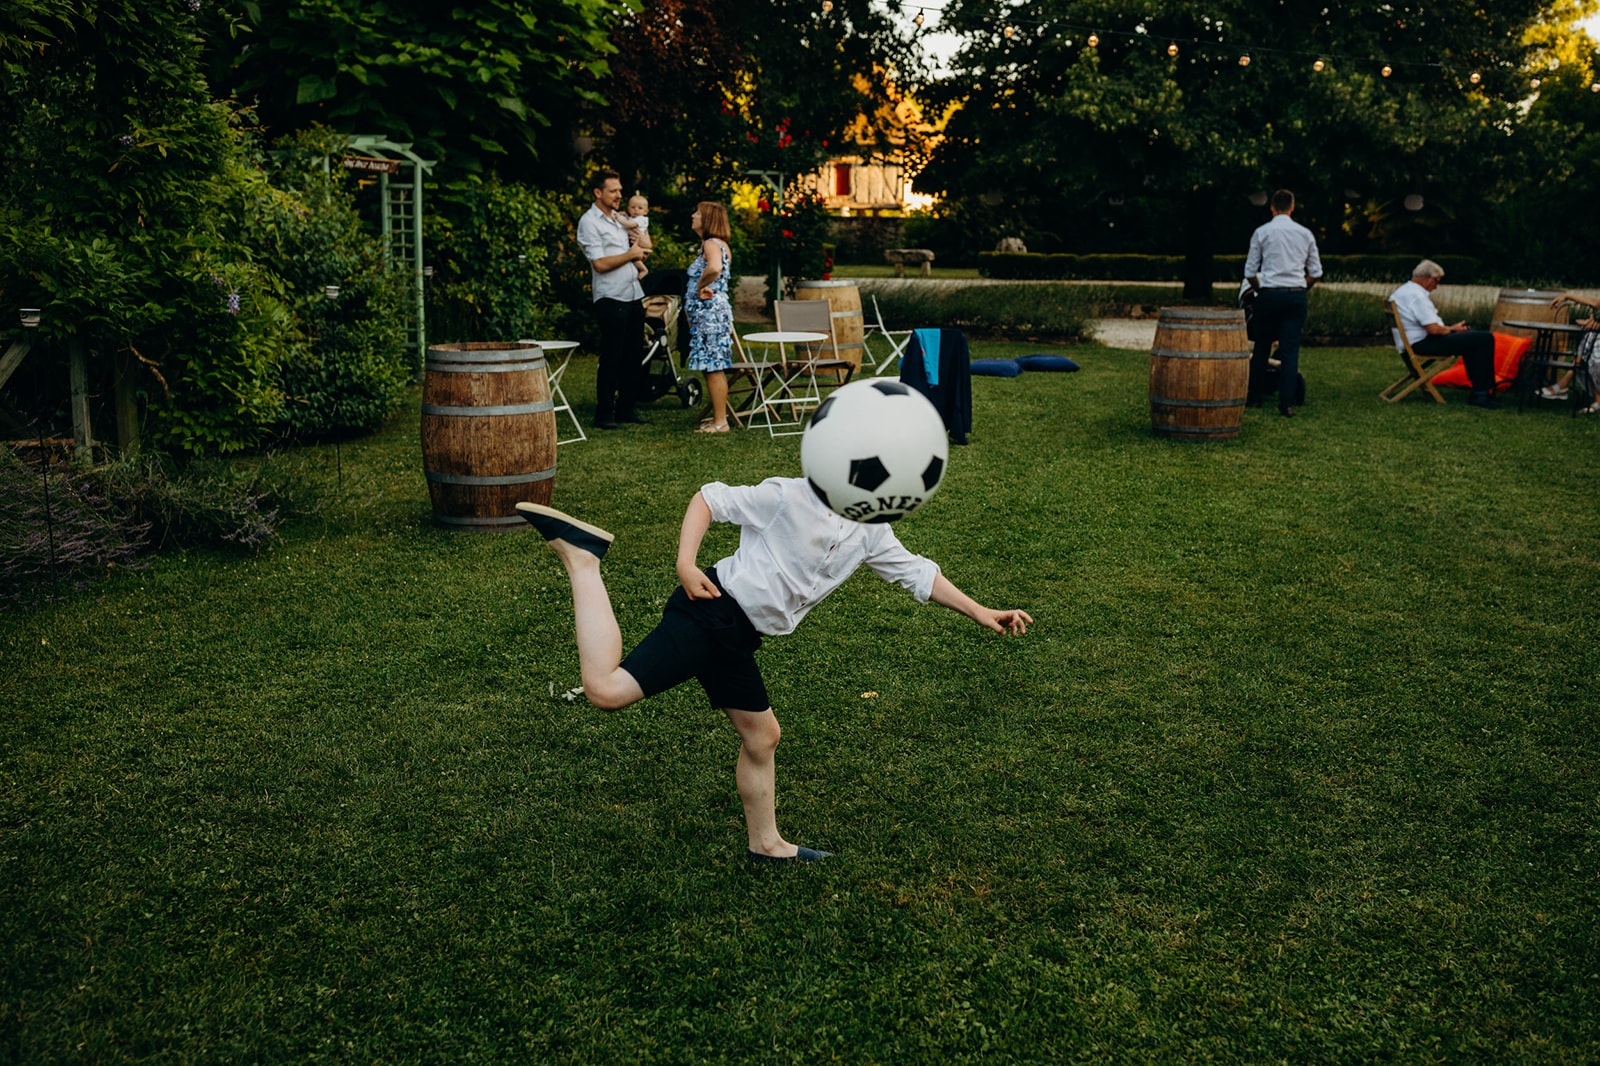 Candid image of a child playfully kicking a large soccer ball covering their head in a garden wedding reception